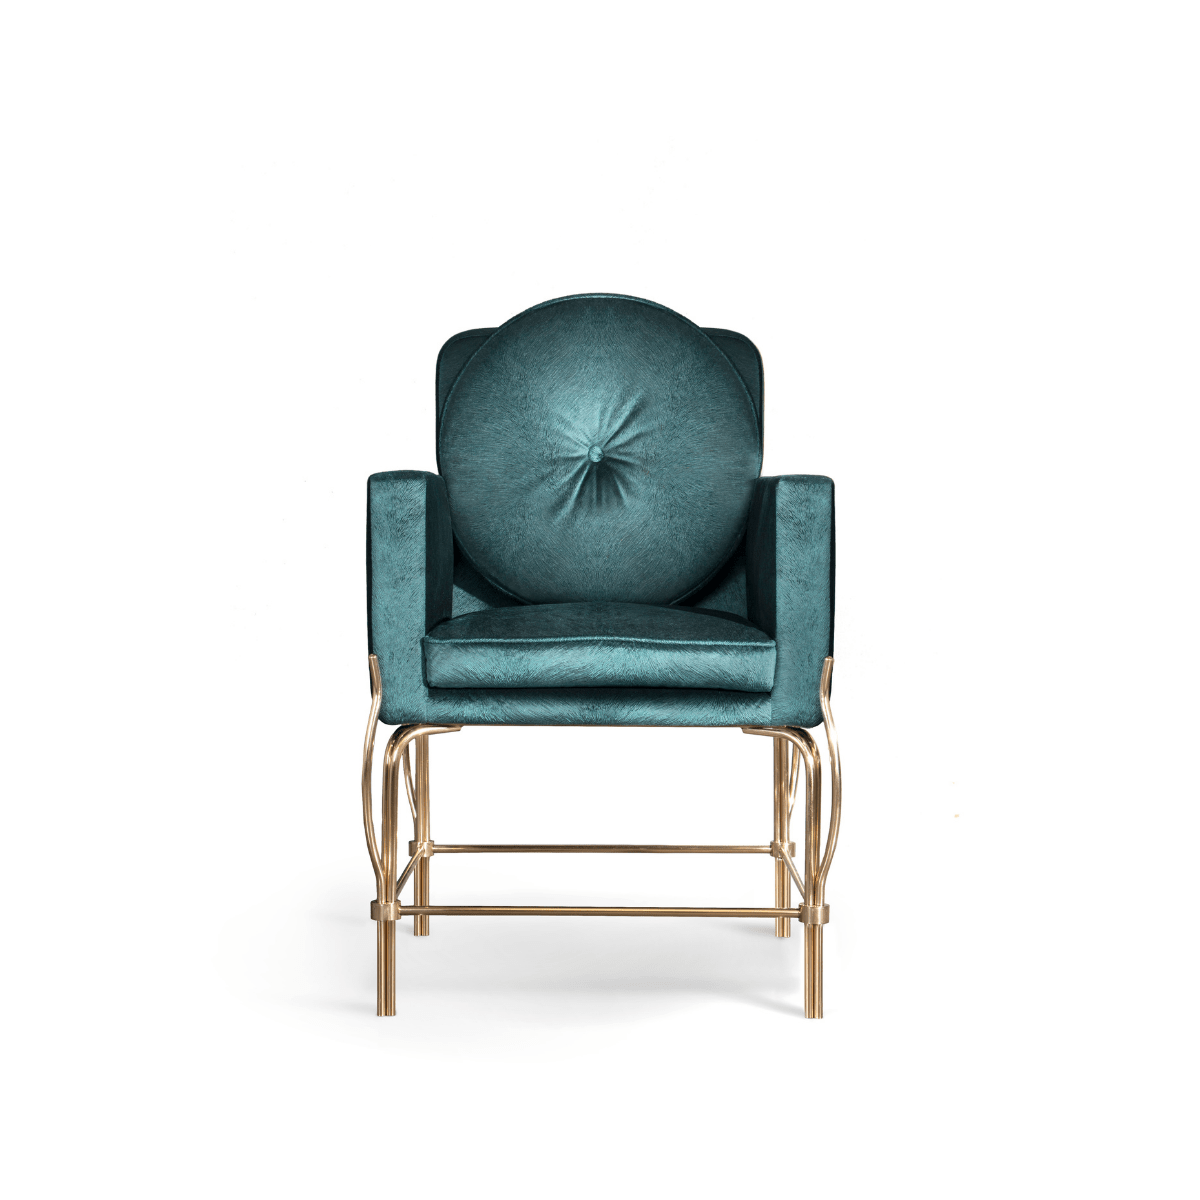 1 Chiclet Armchair